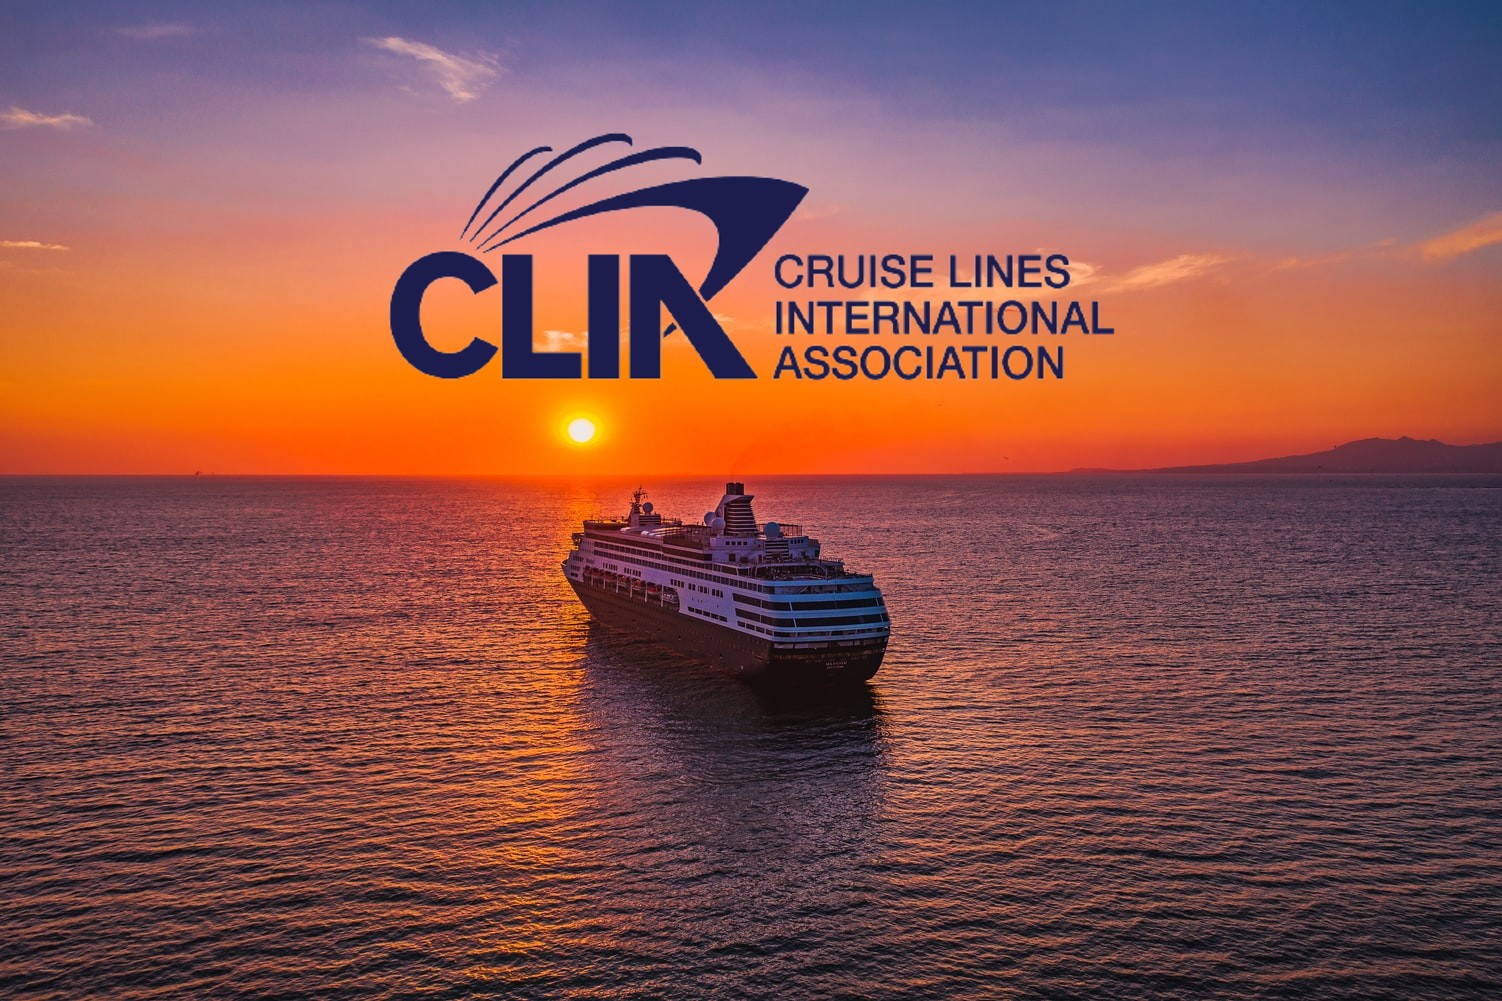 cruise liner at sunset and the CLIA logo on top